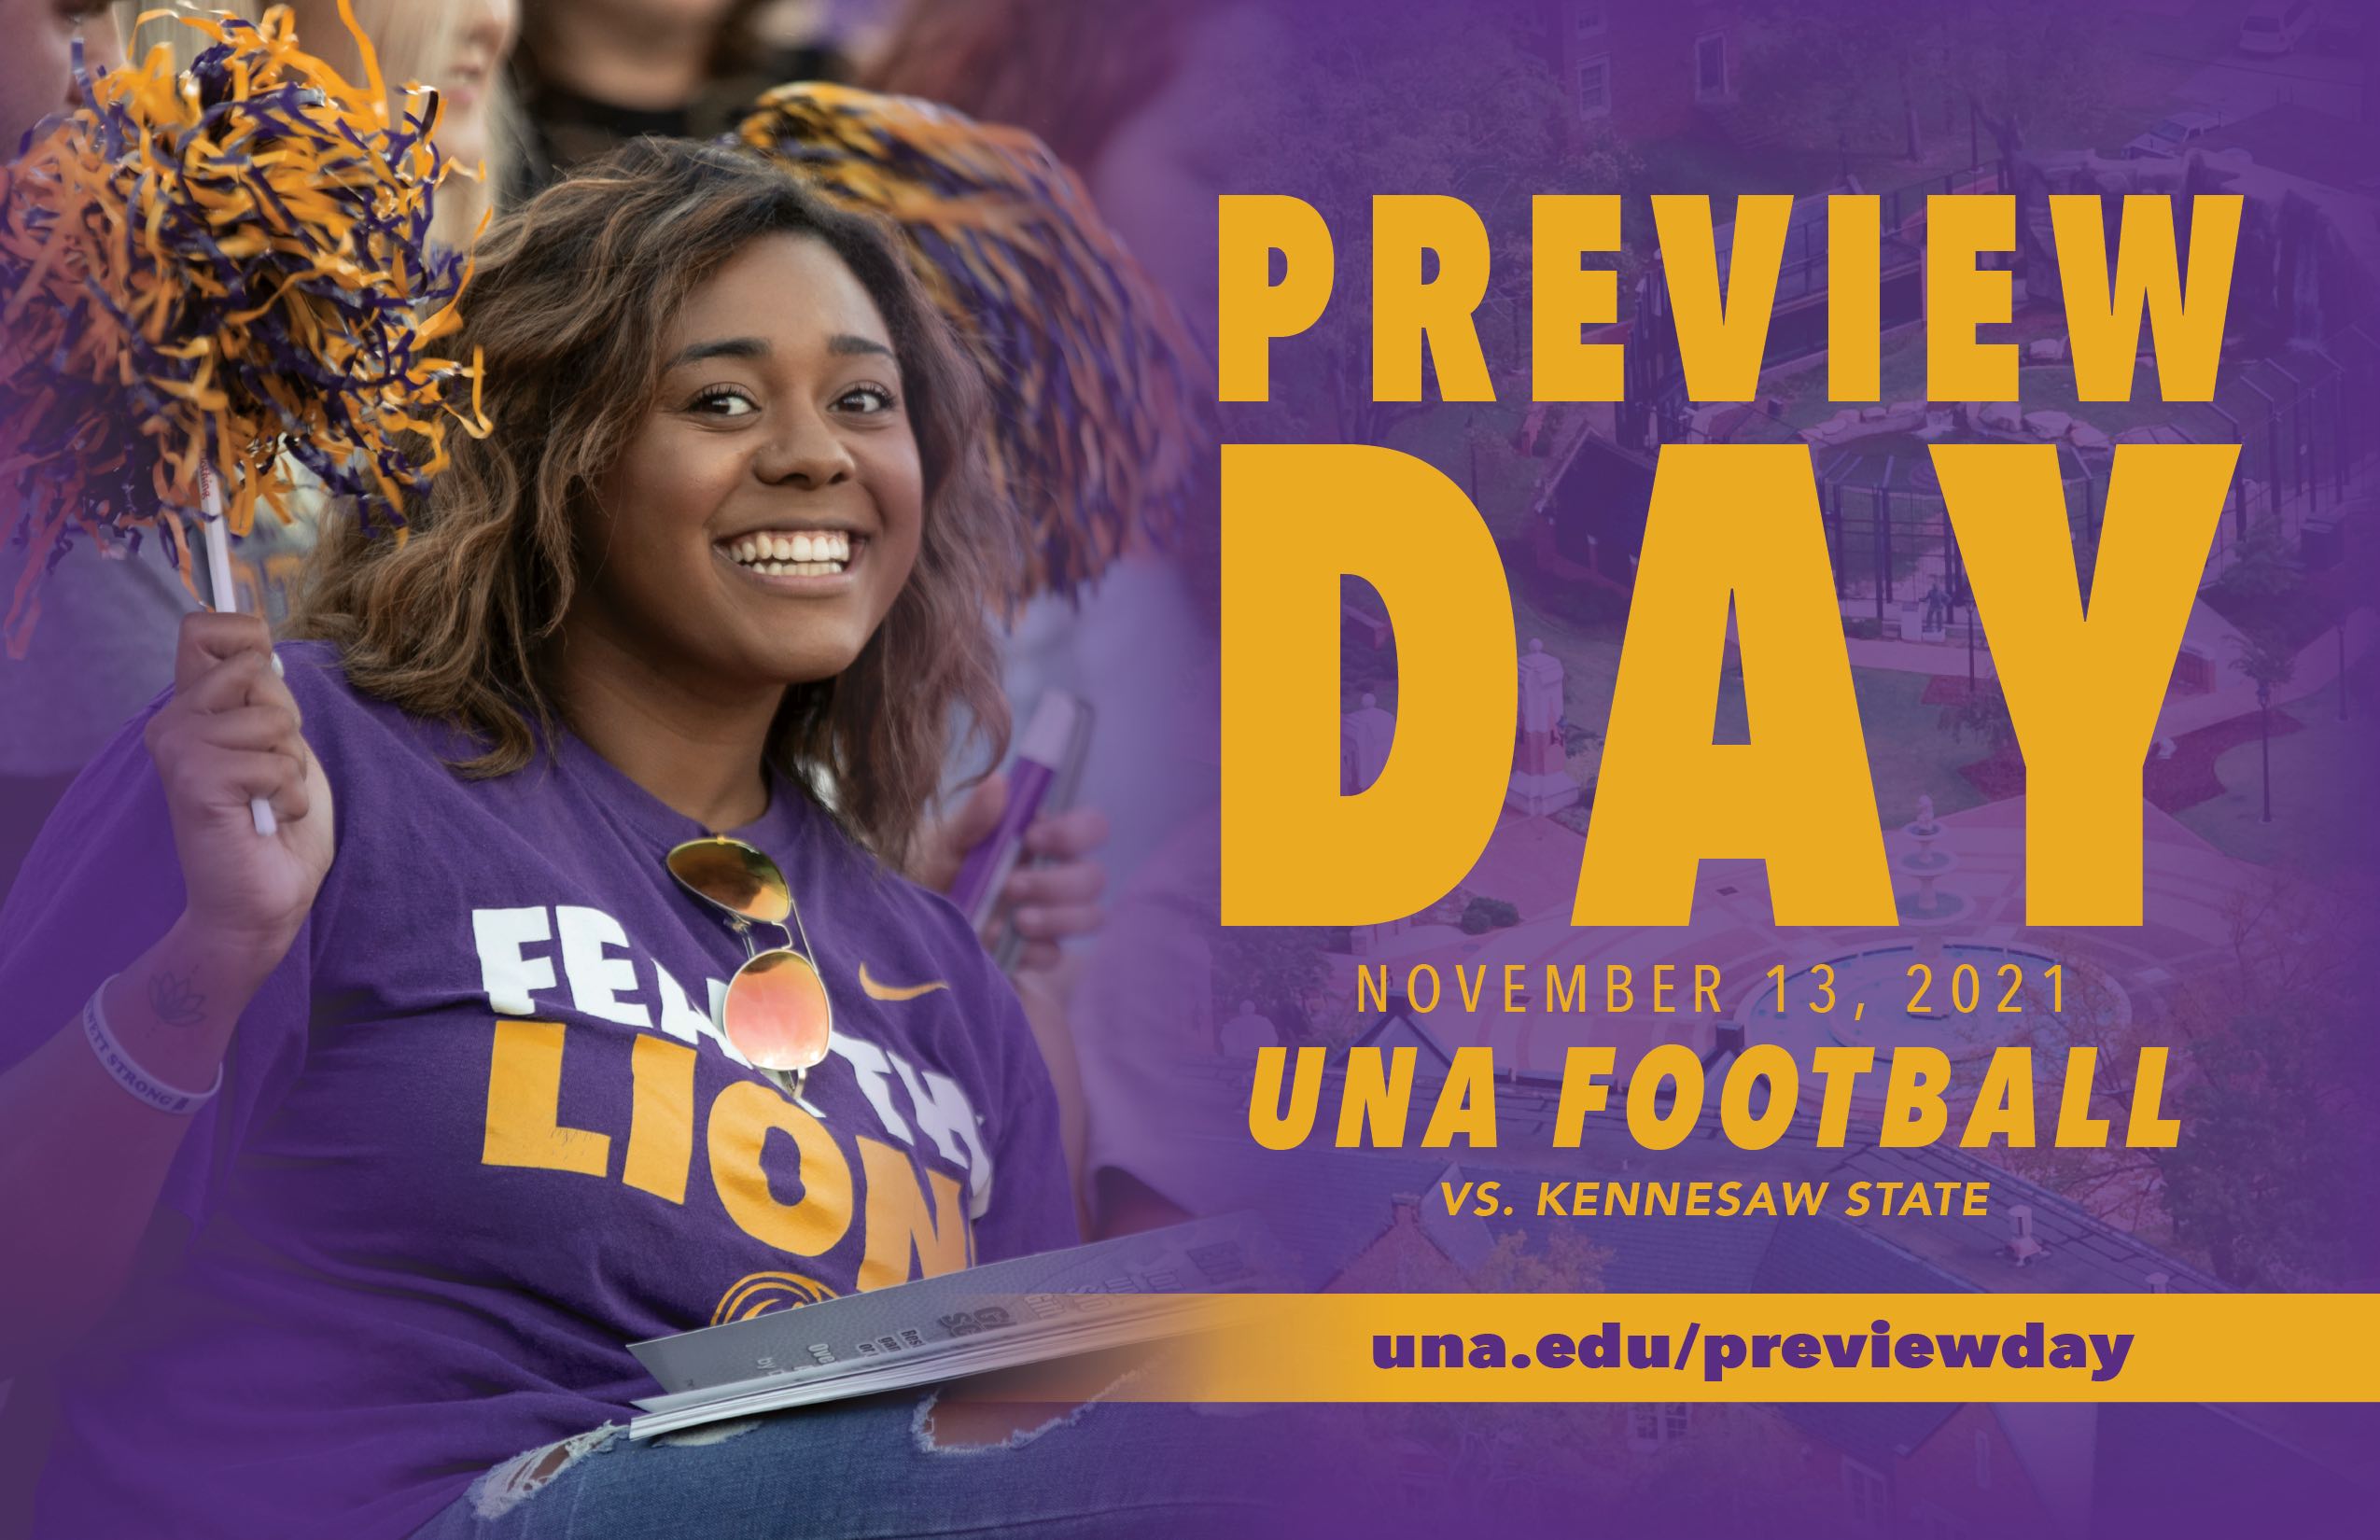 Preview Day, November 13th 2021. UNA Football vs. Kennesaw State.